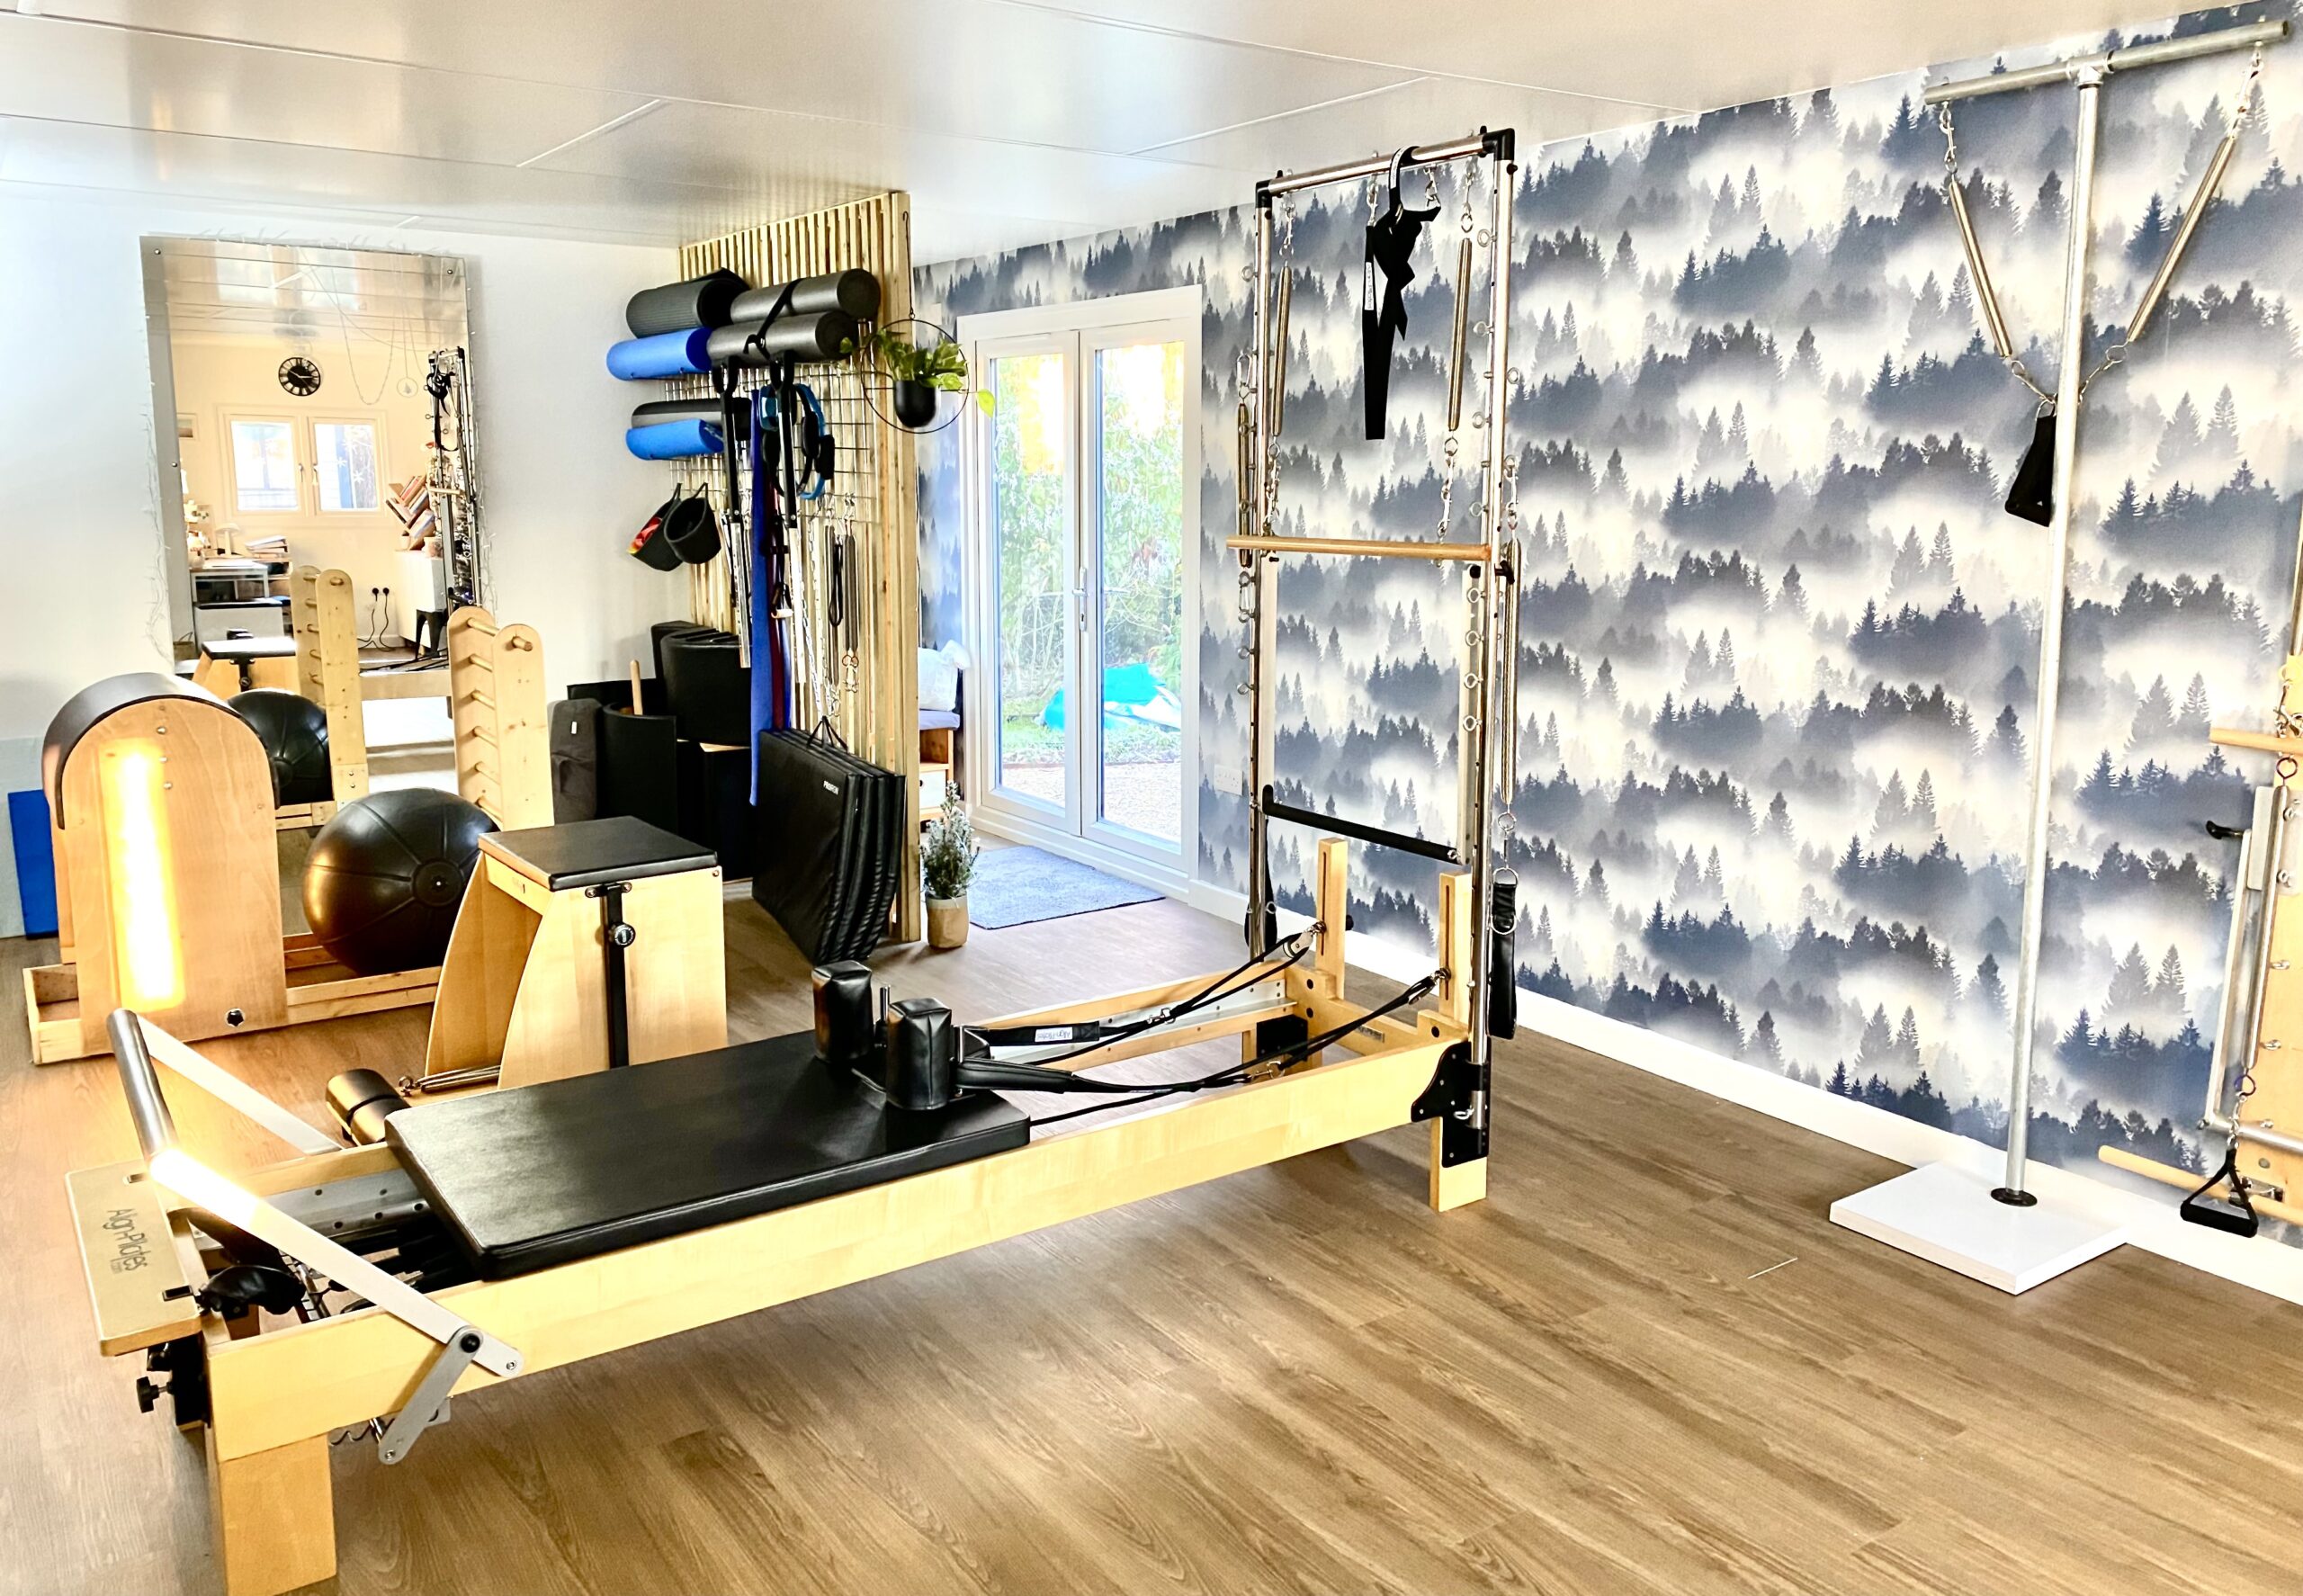 Fascial soul studio, specialising in pain relief, image the showing the Pilates equipment 